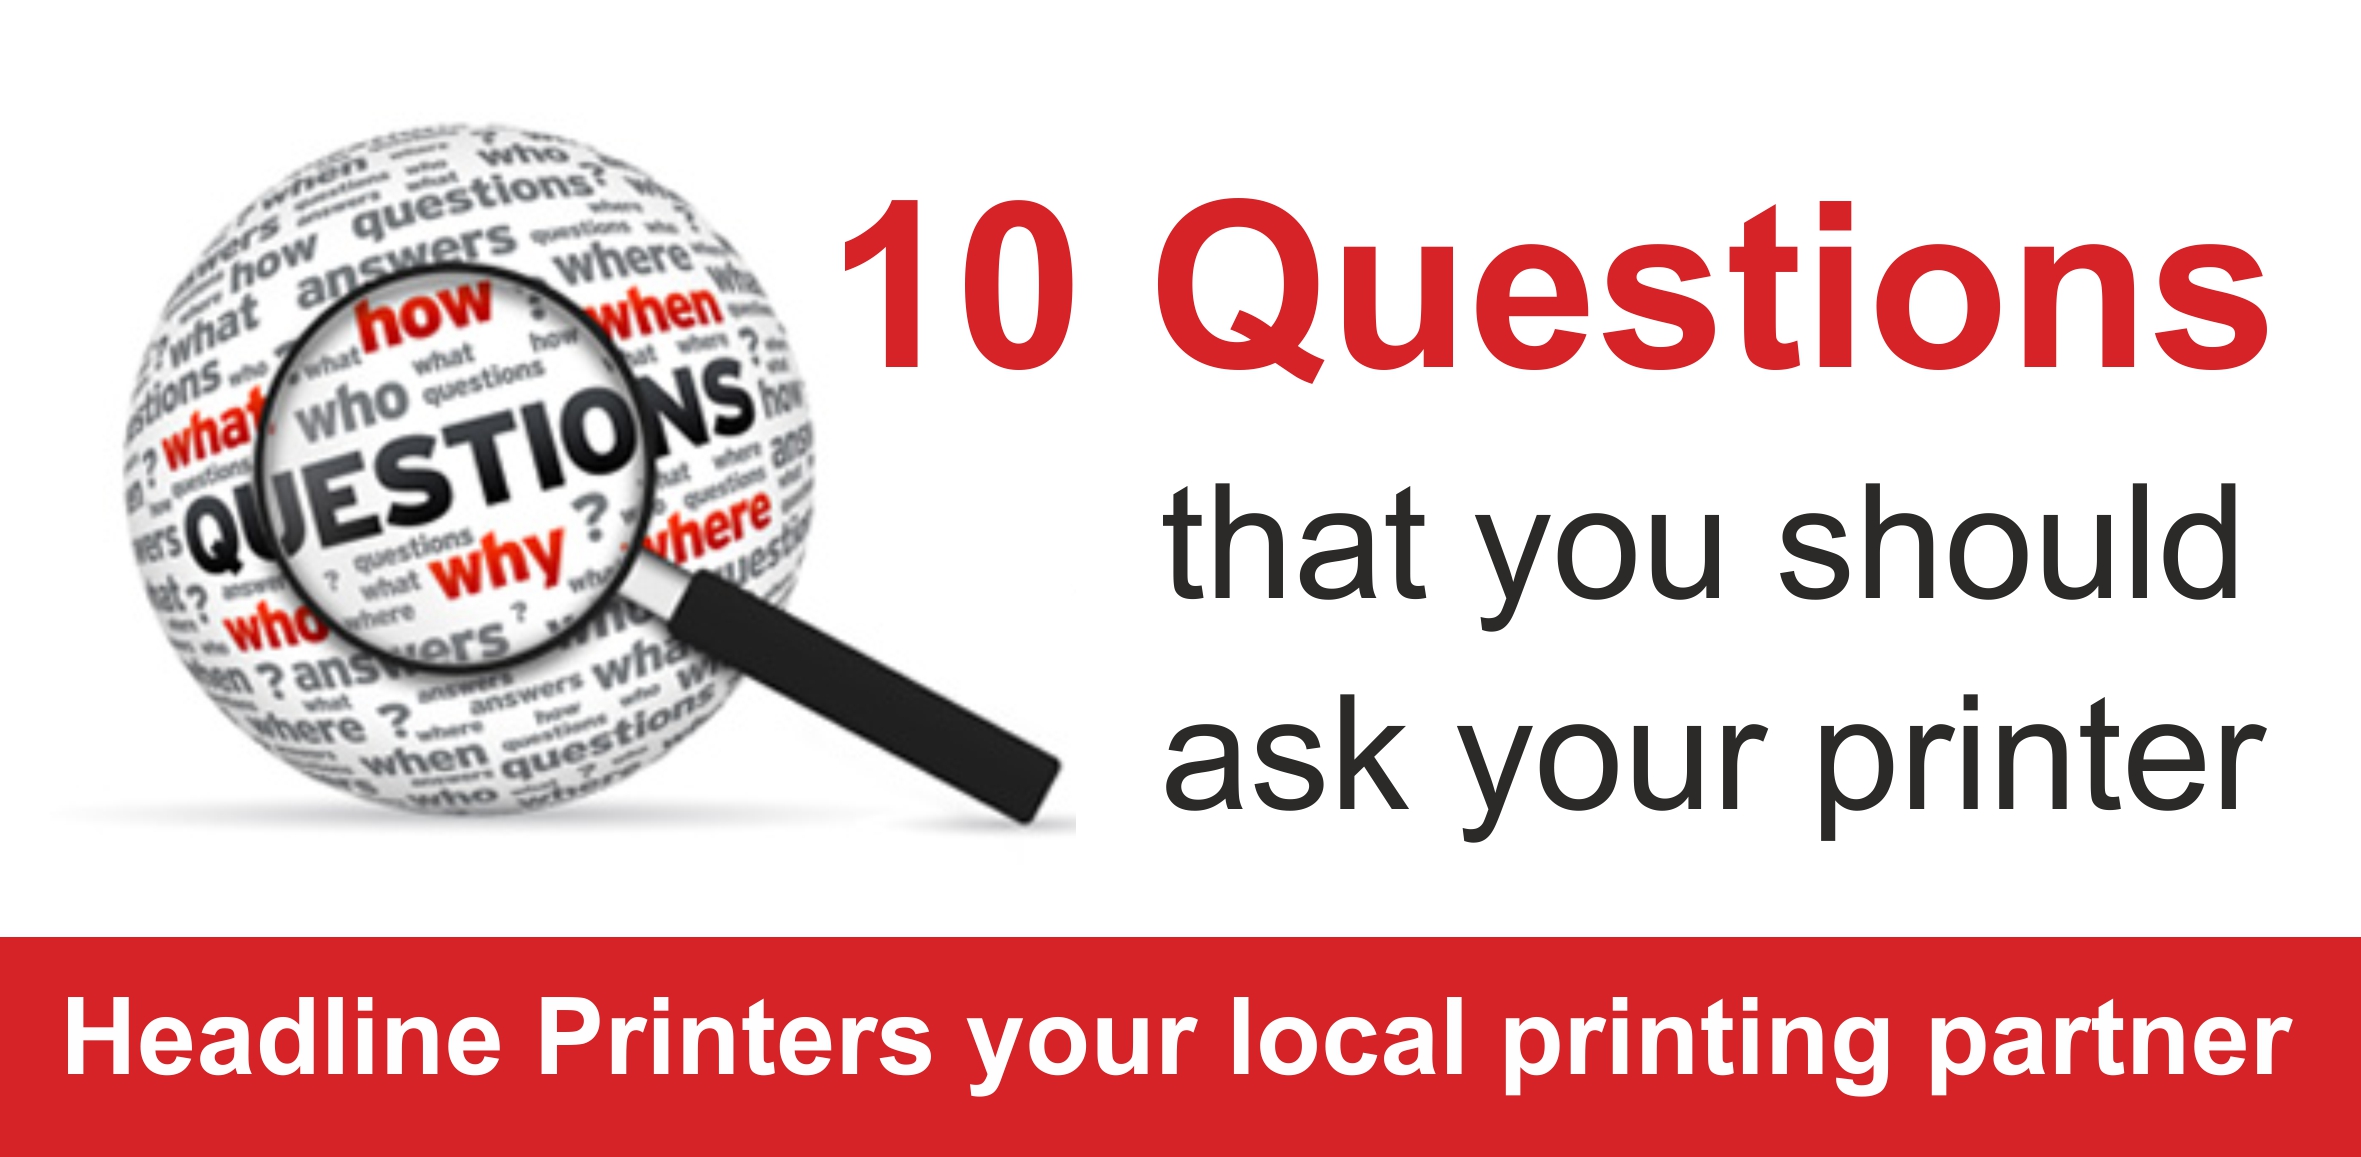 10 Questions you should ask your printer